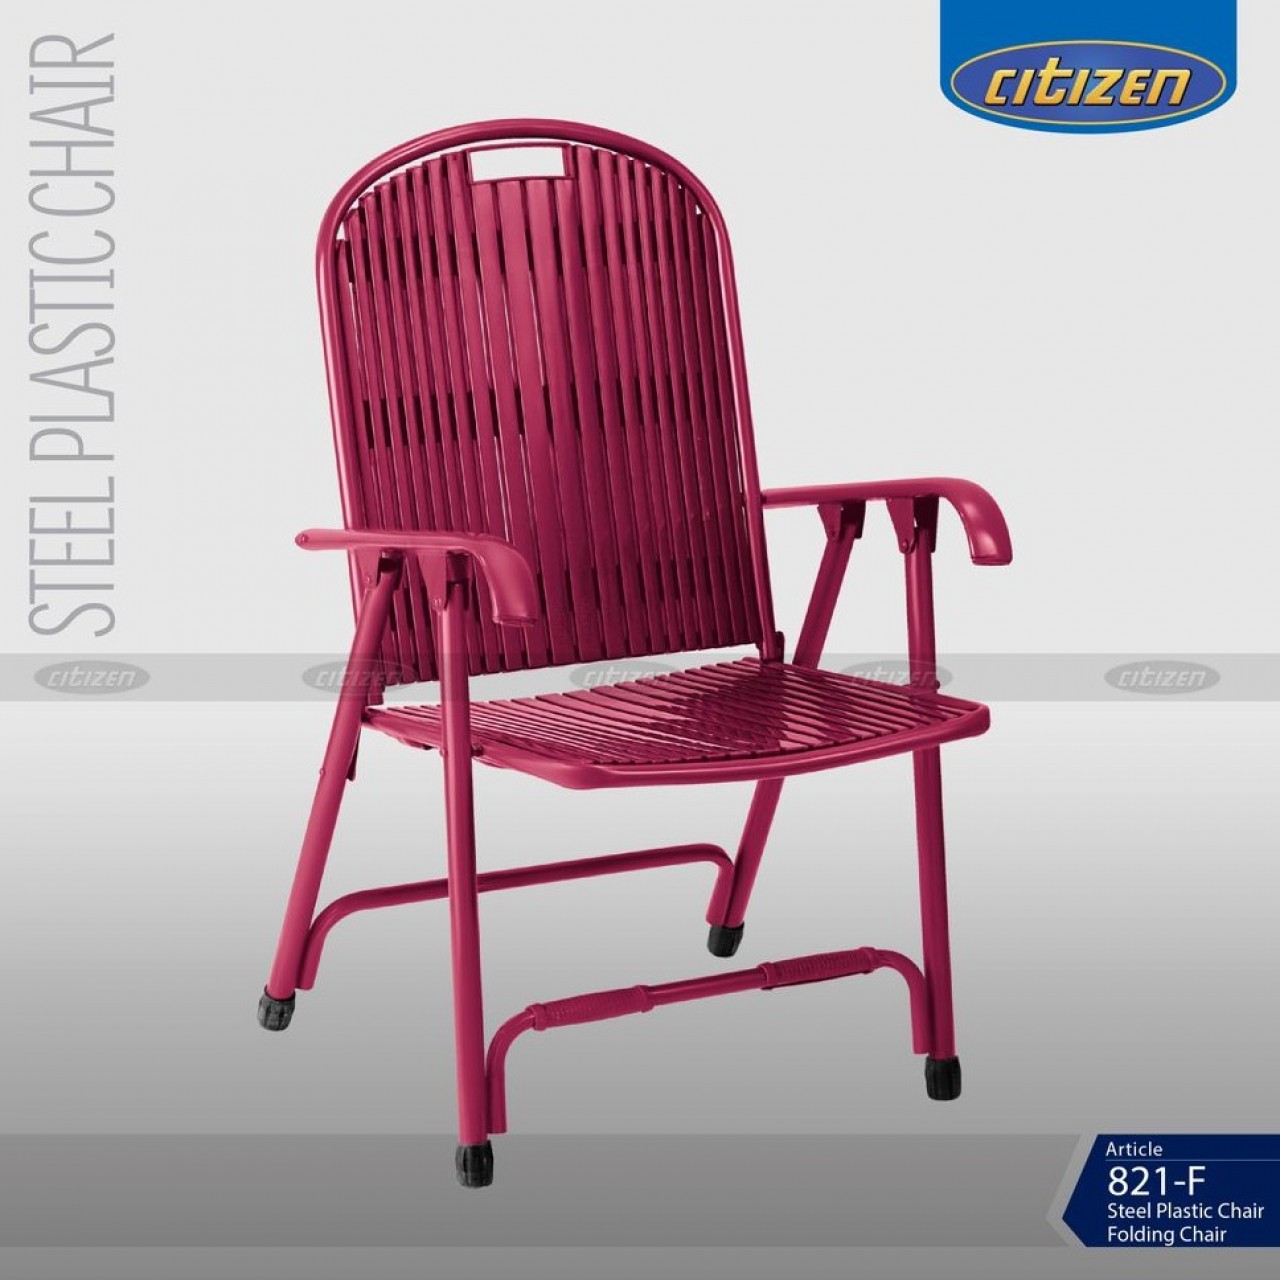 Citizen 821-F Steel & Plastic Folding Chair With Arms